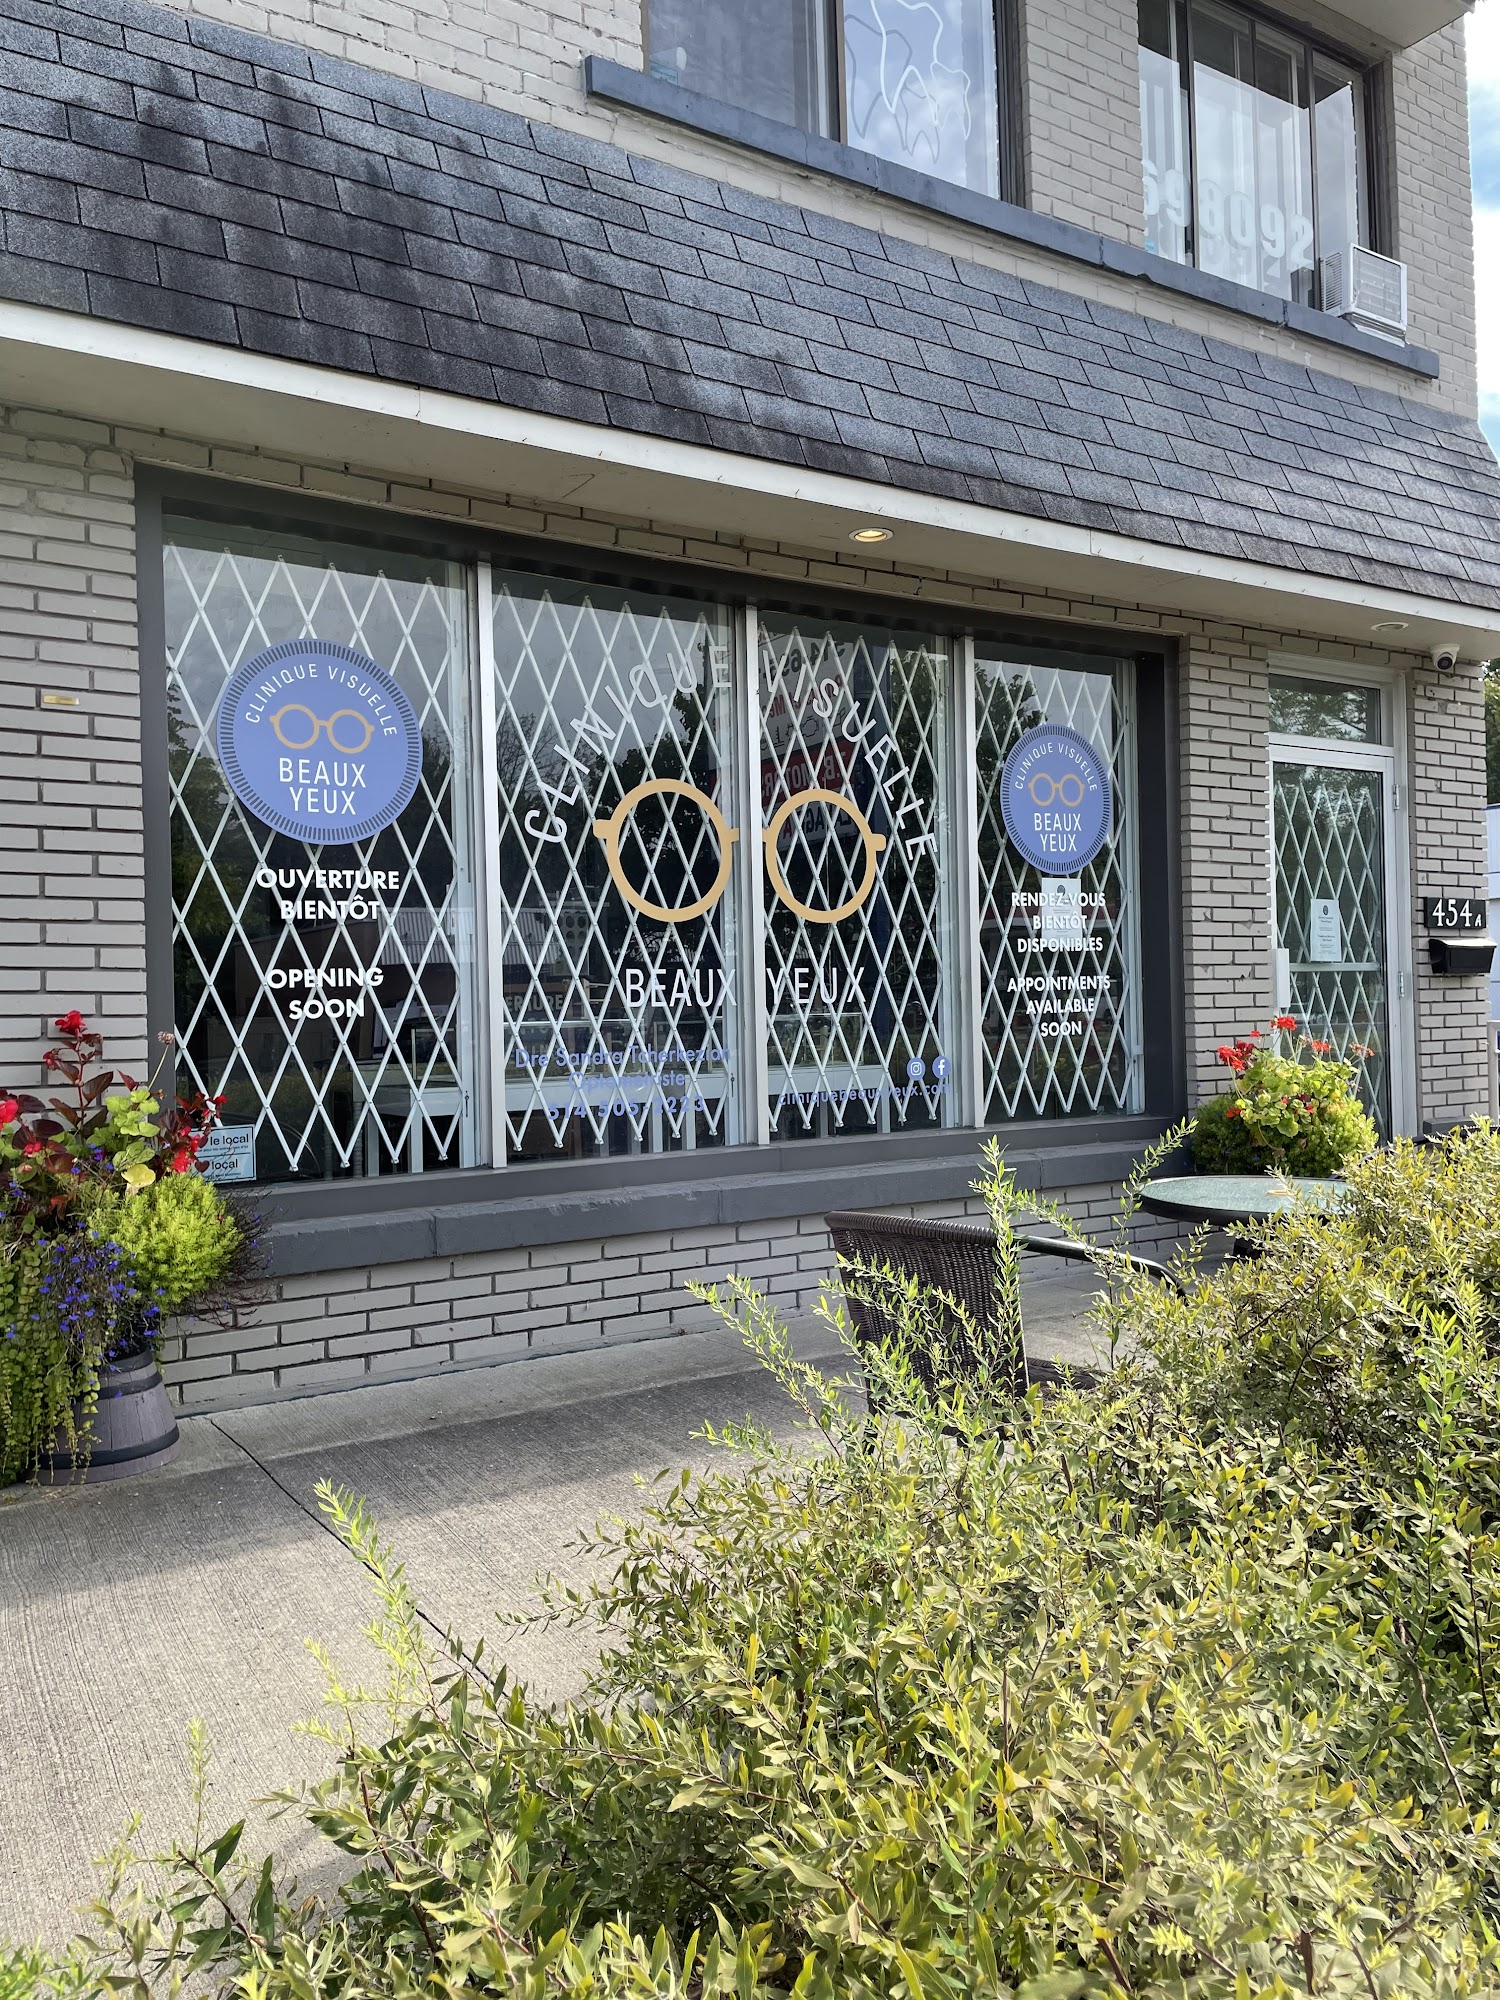 Clinique Beaux Yeux 454 A Beaconsfield Blvd, Beaconsfield Quebec H9W 4B9